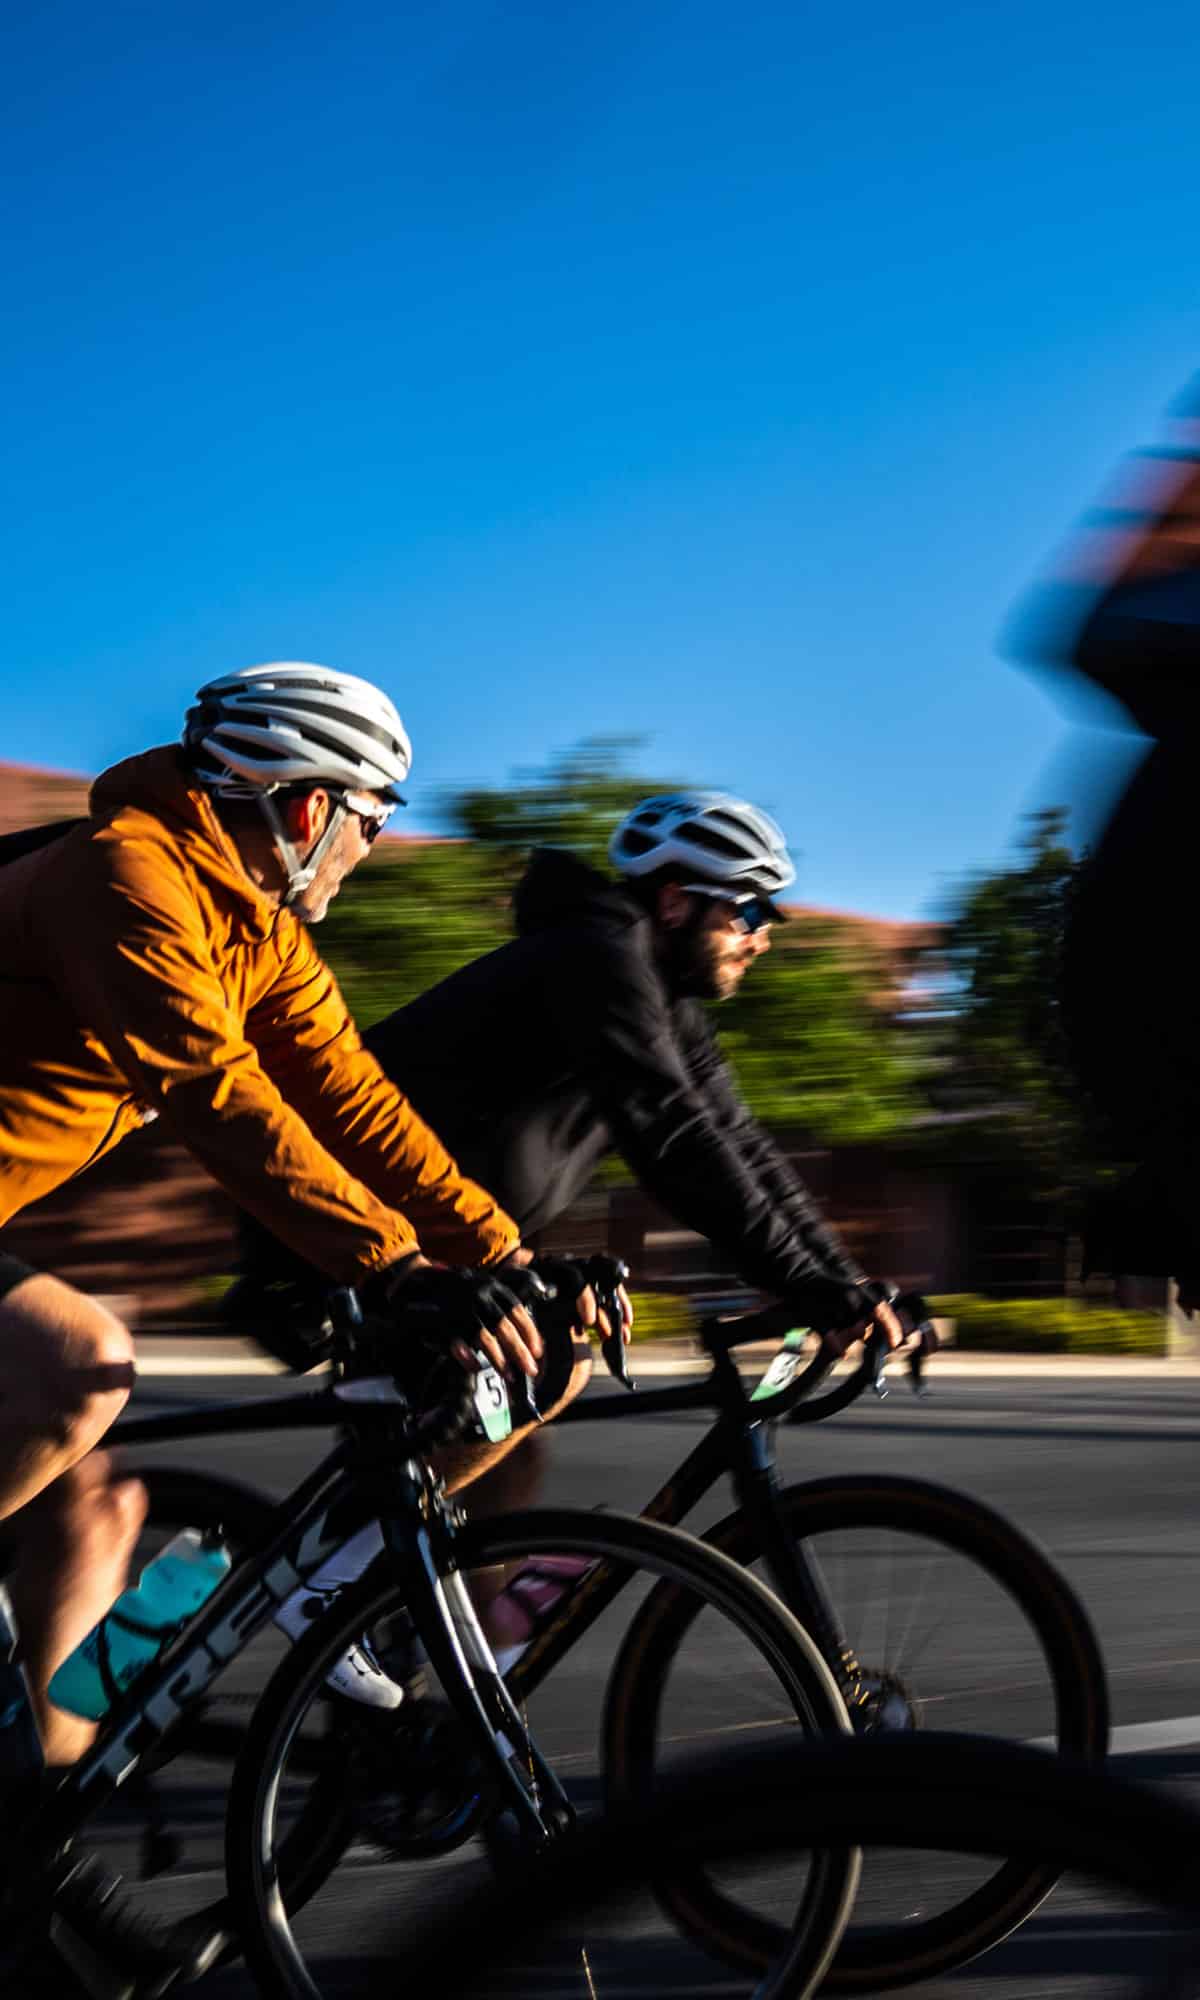 Two road cyclists cruising with a blurry background behind them.